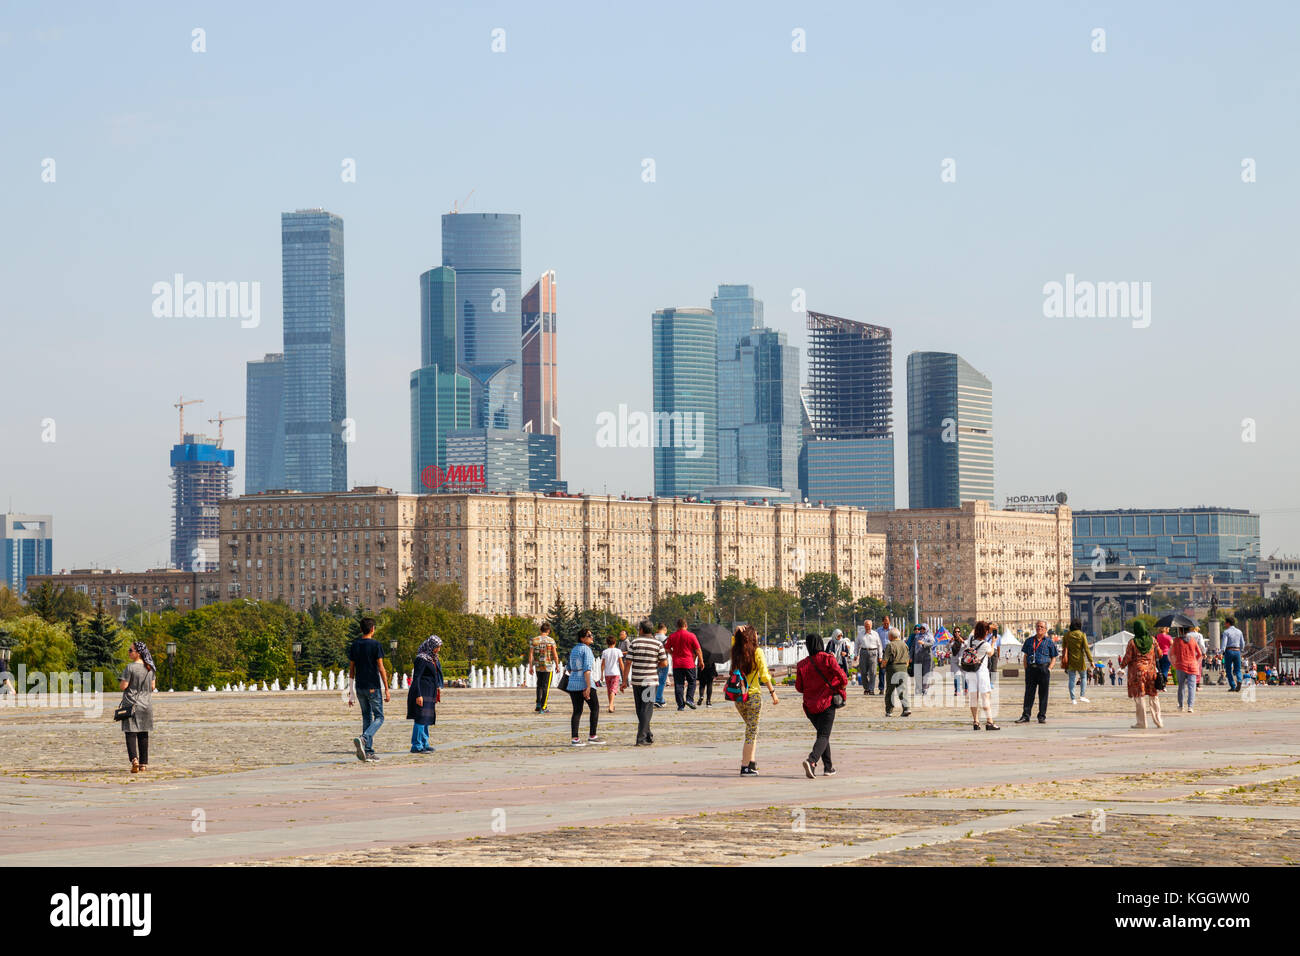 Poklonnaya Hill, Kutuzovsky Prospekt with residential buildings and the Moscow International Business Center (MIBC) at the background. Moscow, Russia. Stock Photo